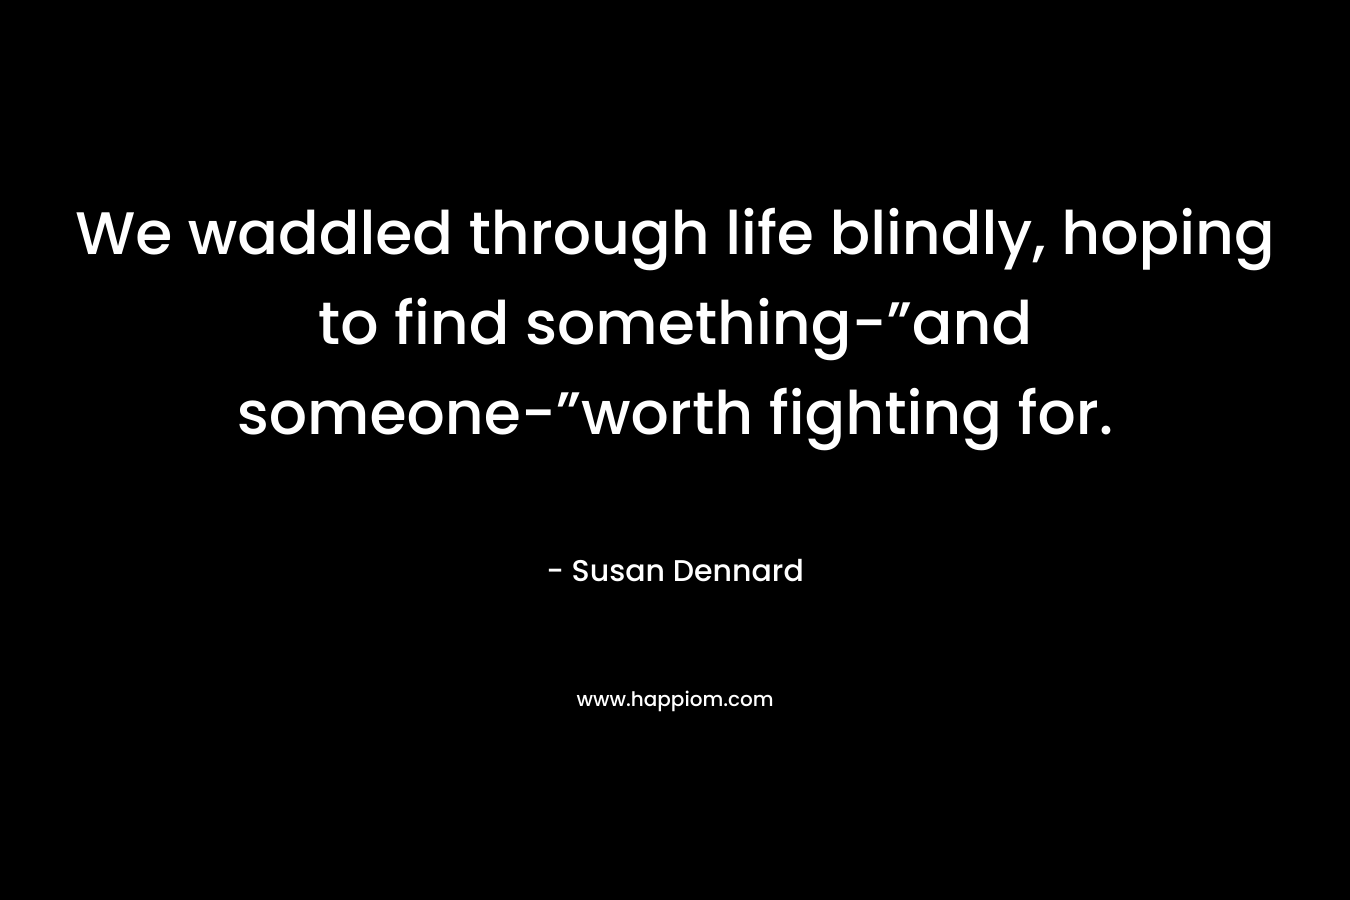 We waddled through life blindly, hoping to find something-”and someone-”worth fighting for. – Susan Dennard